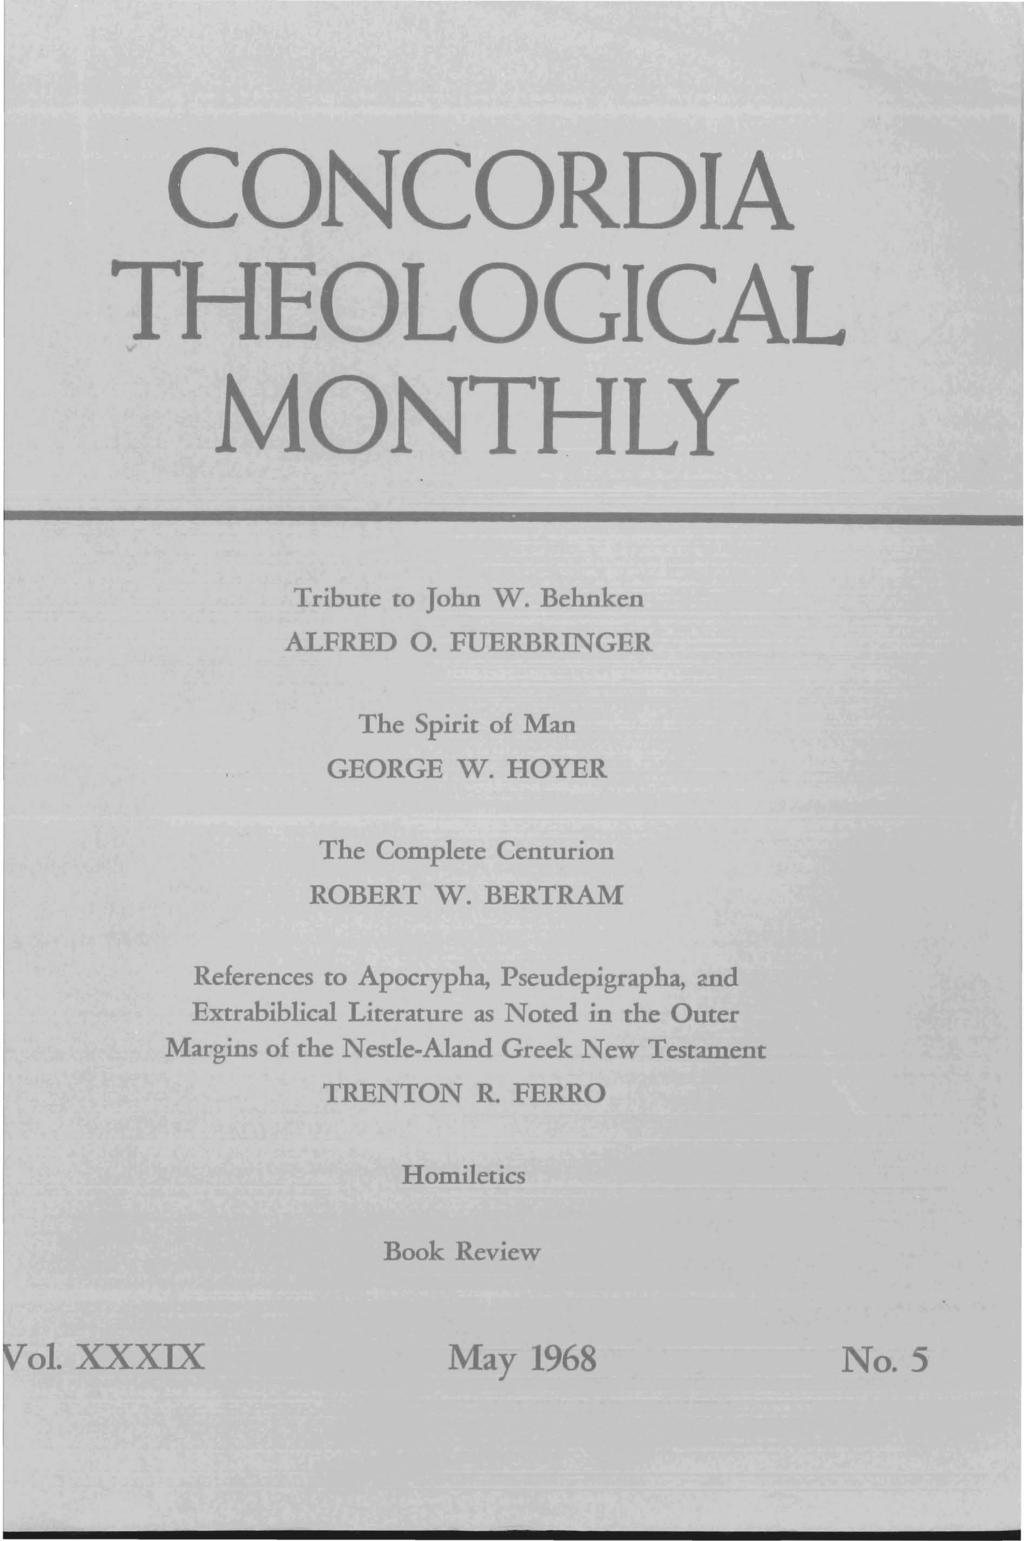 CONCORDIA THEOLOGICAL MONTHLY Tribute to John W. Behnken ALFRED O. FUERBRINGER The Spirit of Man GEORGE W. HOYER The Complete Centurion ROBERT W.